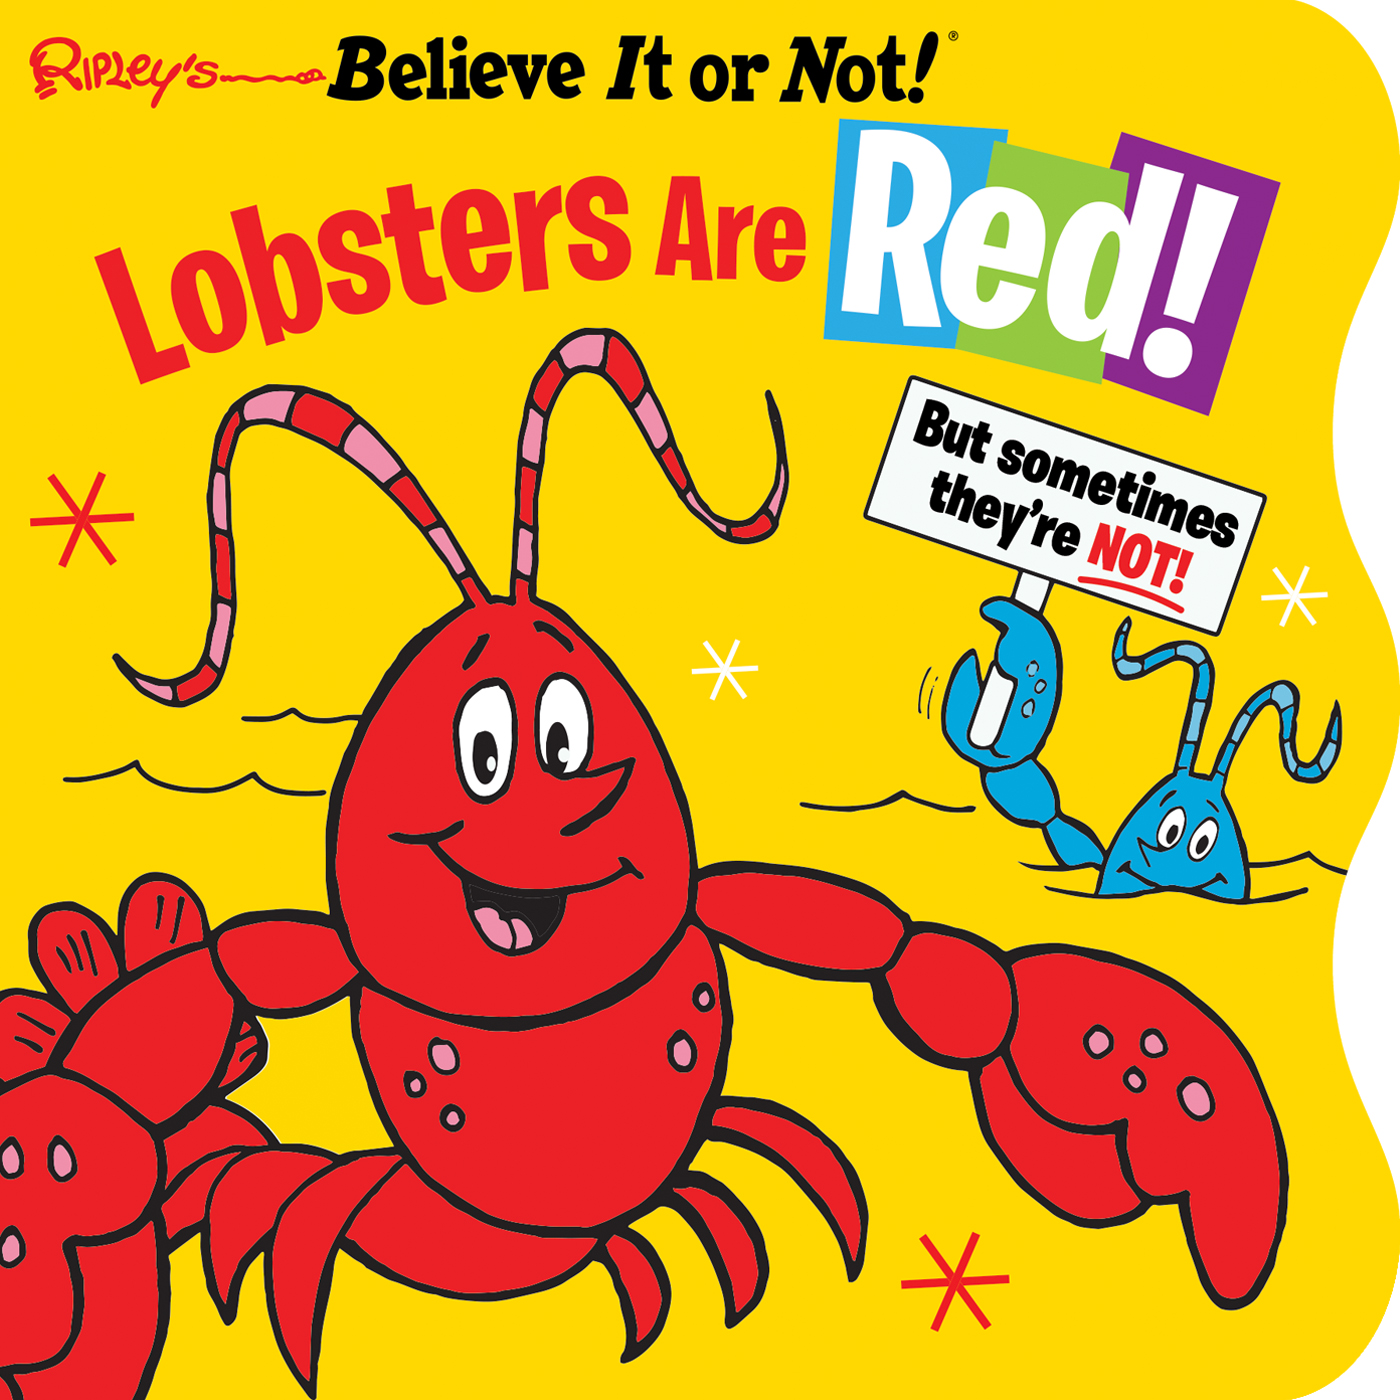 Lobsters Are Red! But Sometimes They’re Not!